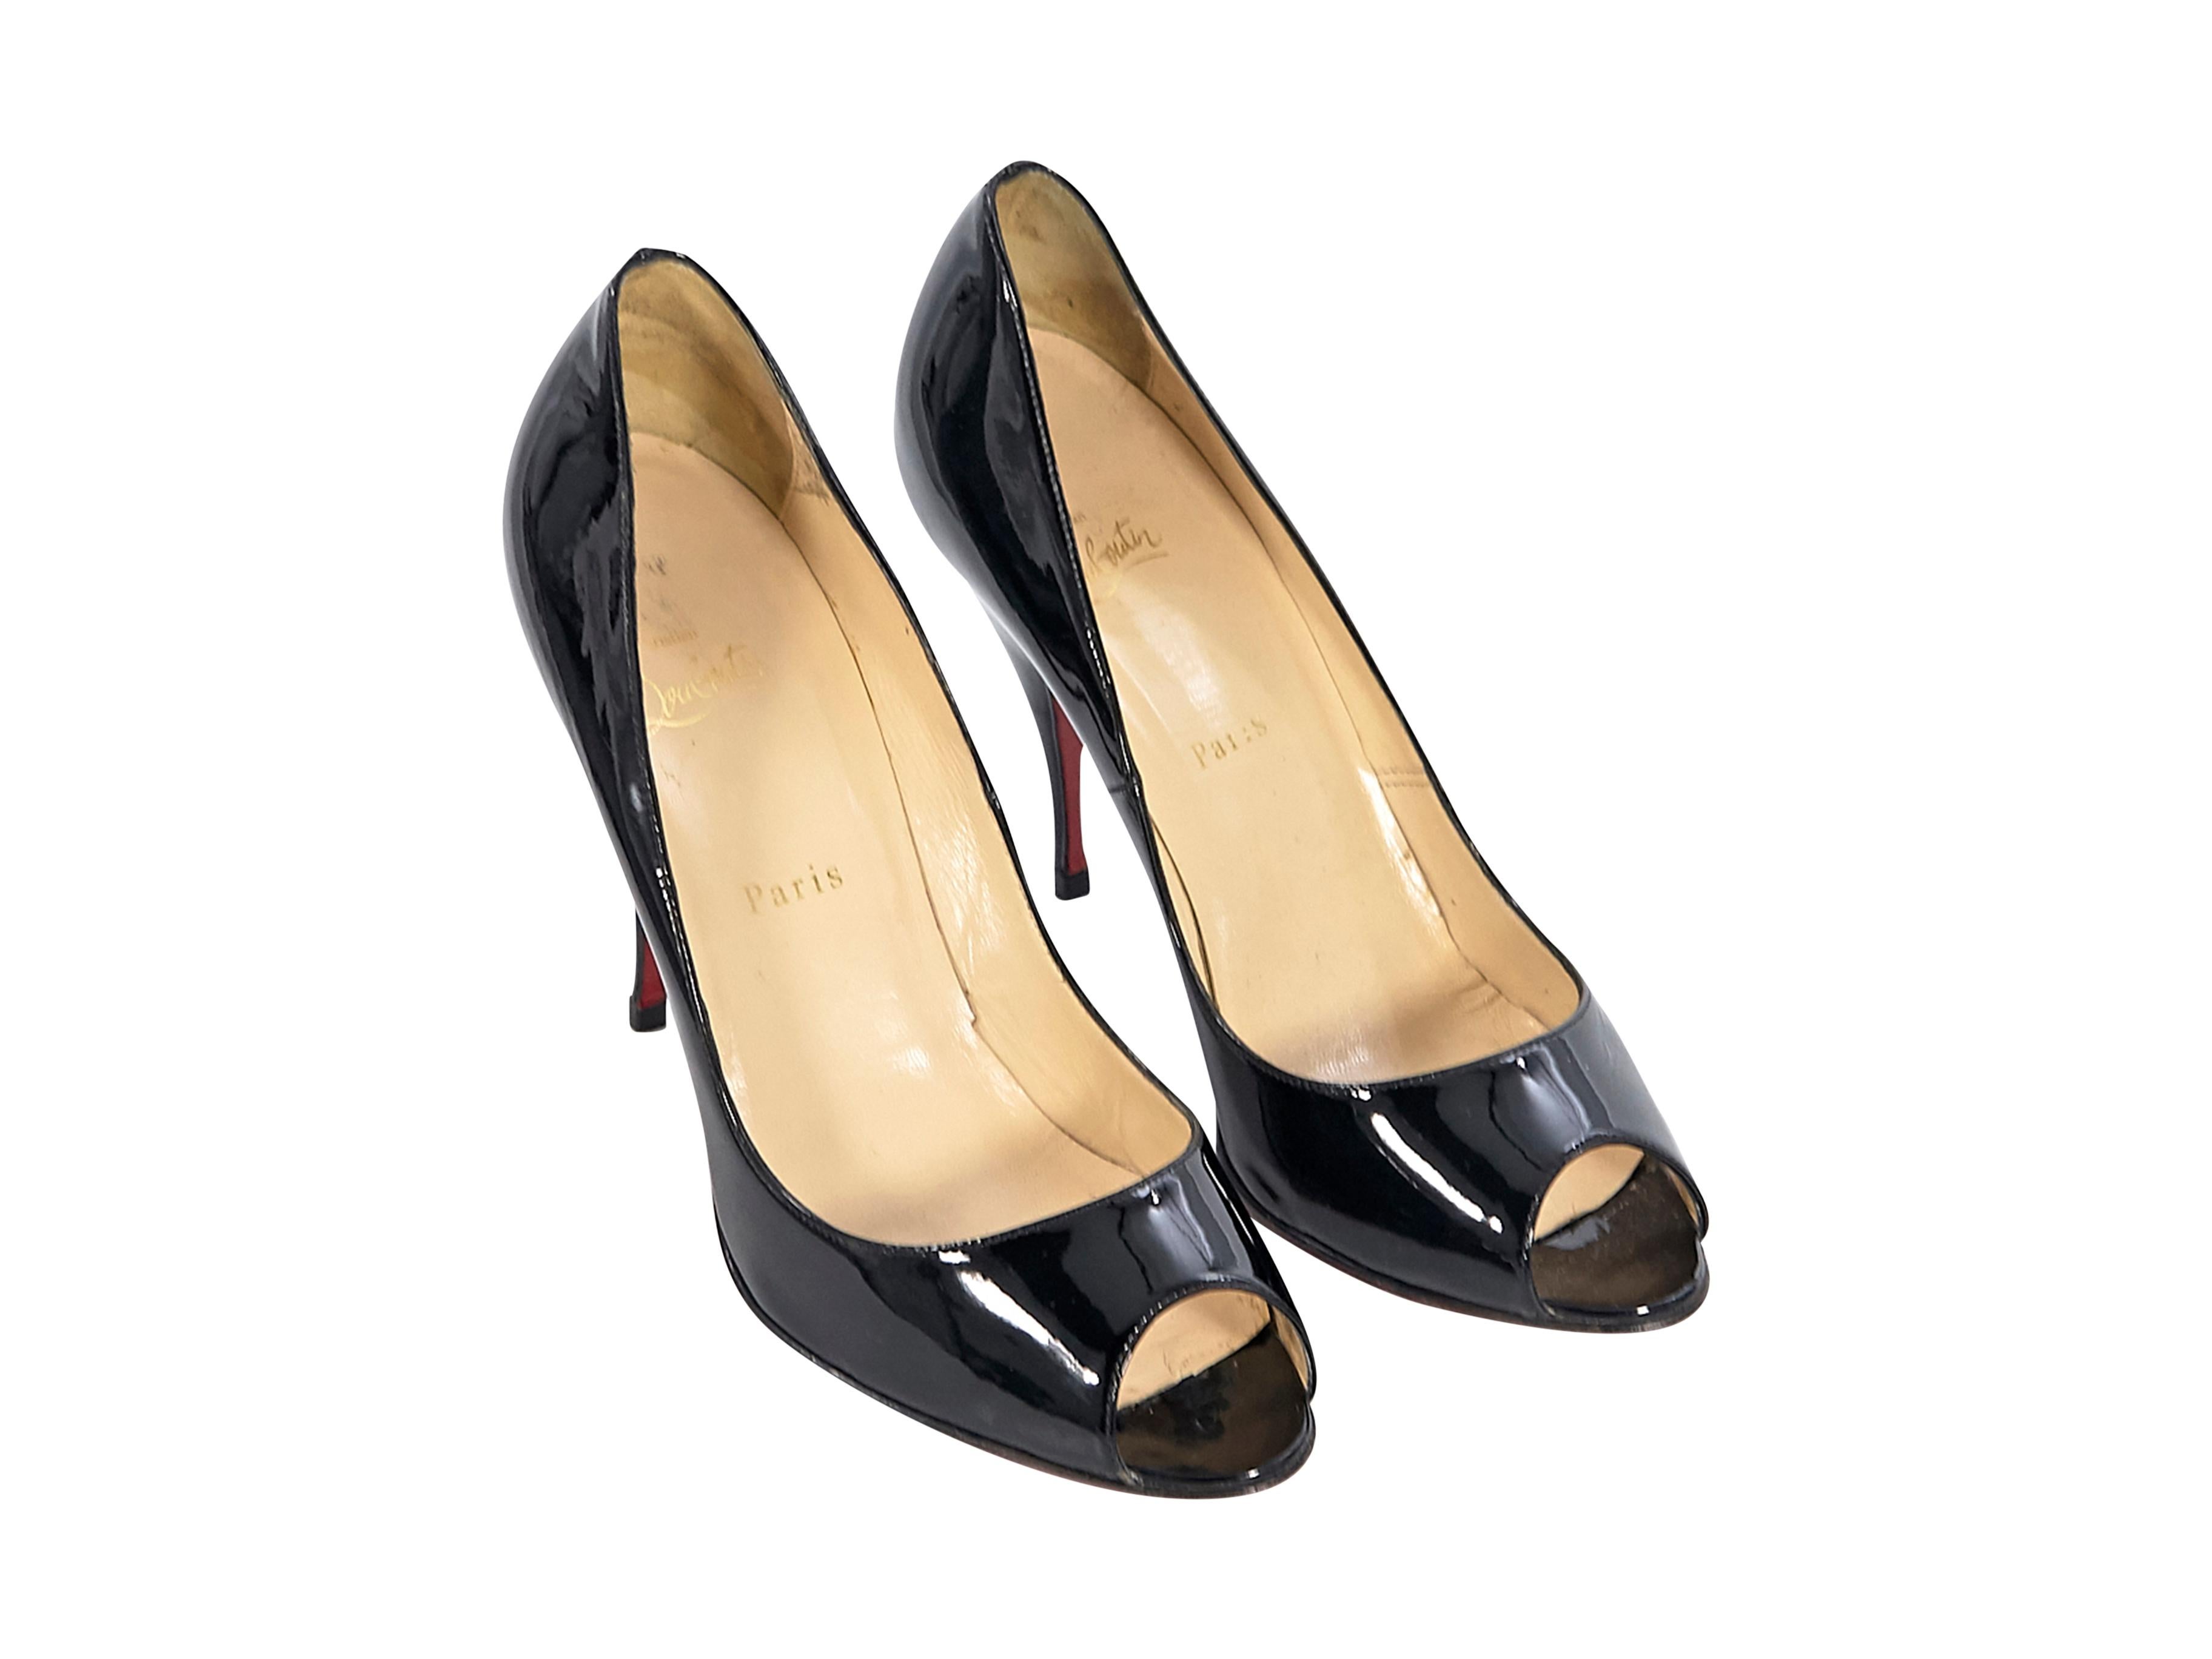 Product details:  Black patent leather pumps by Christian Louboutin.  Peep toe.  Iconic red sole.  Slip-on style.  4.5